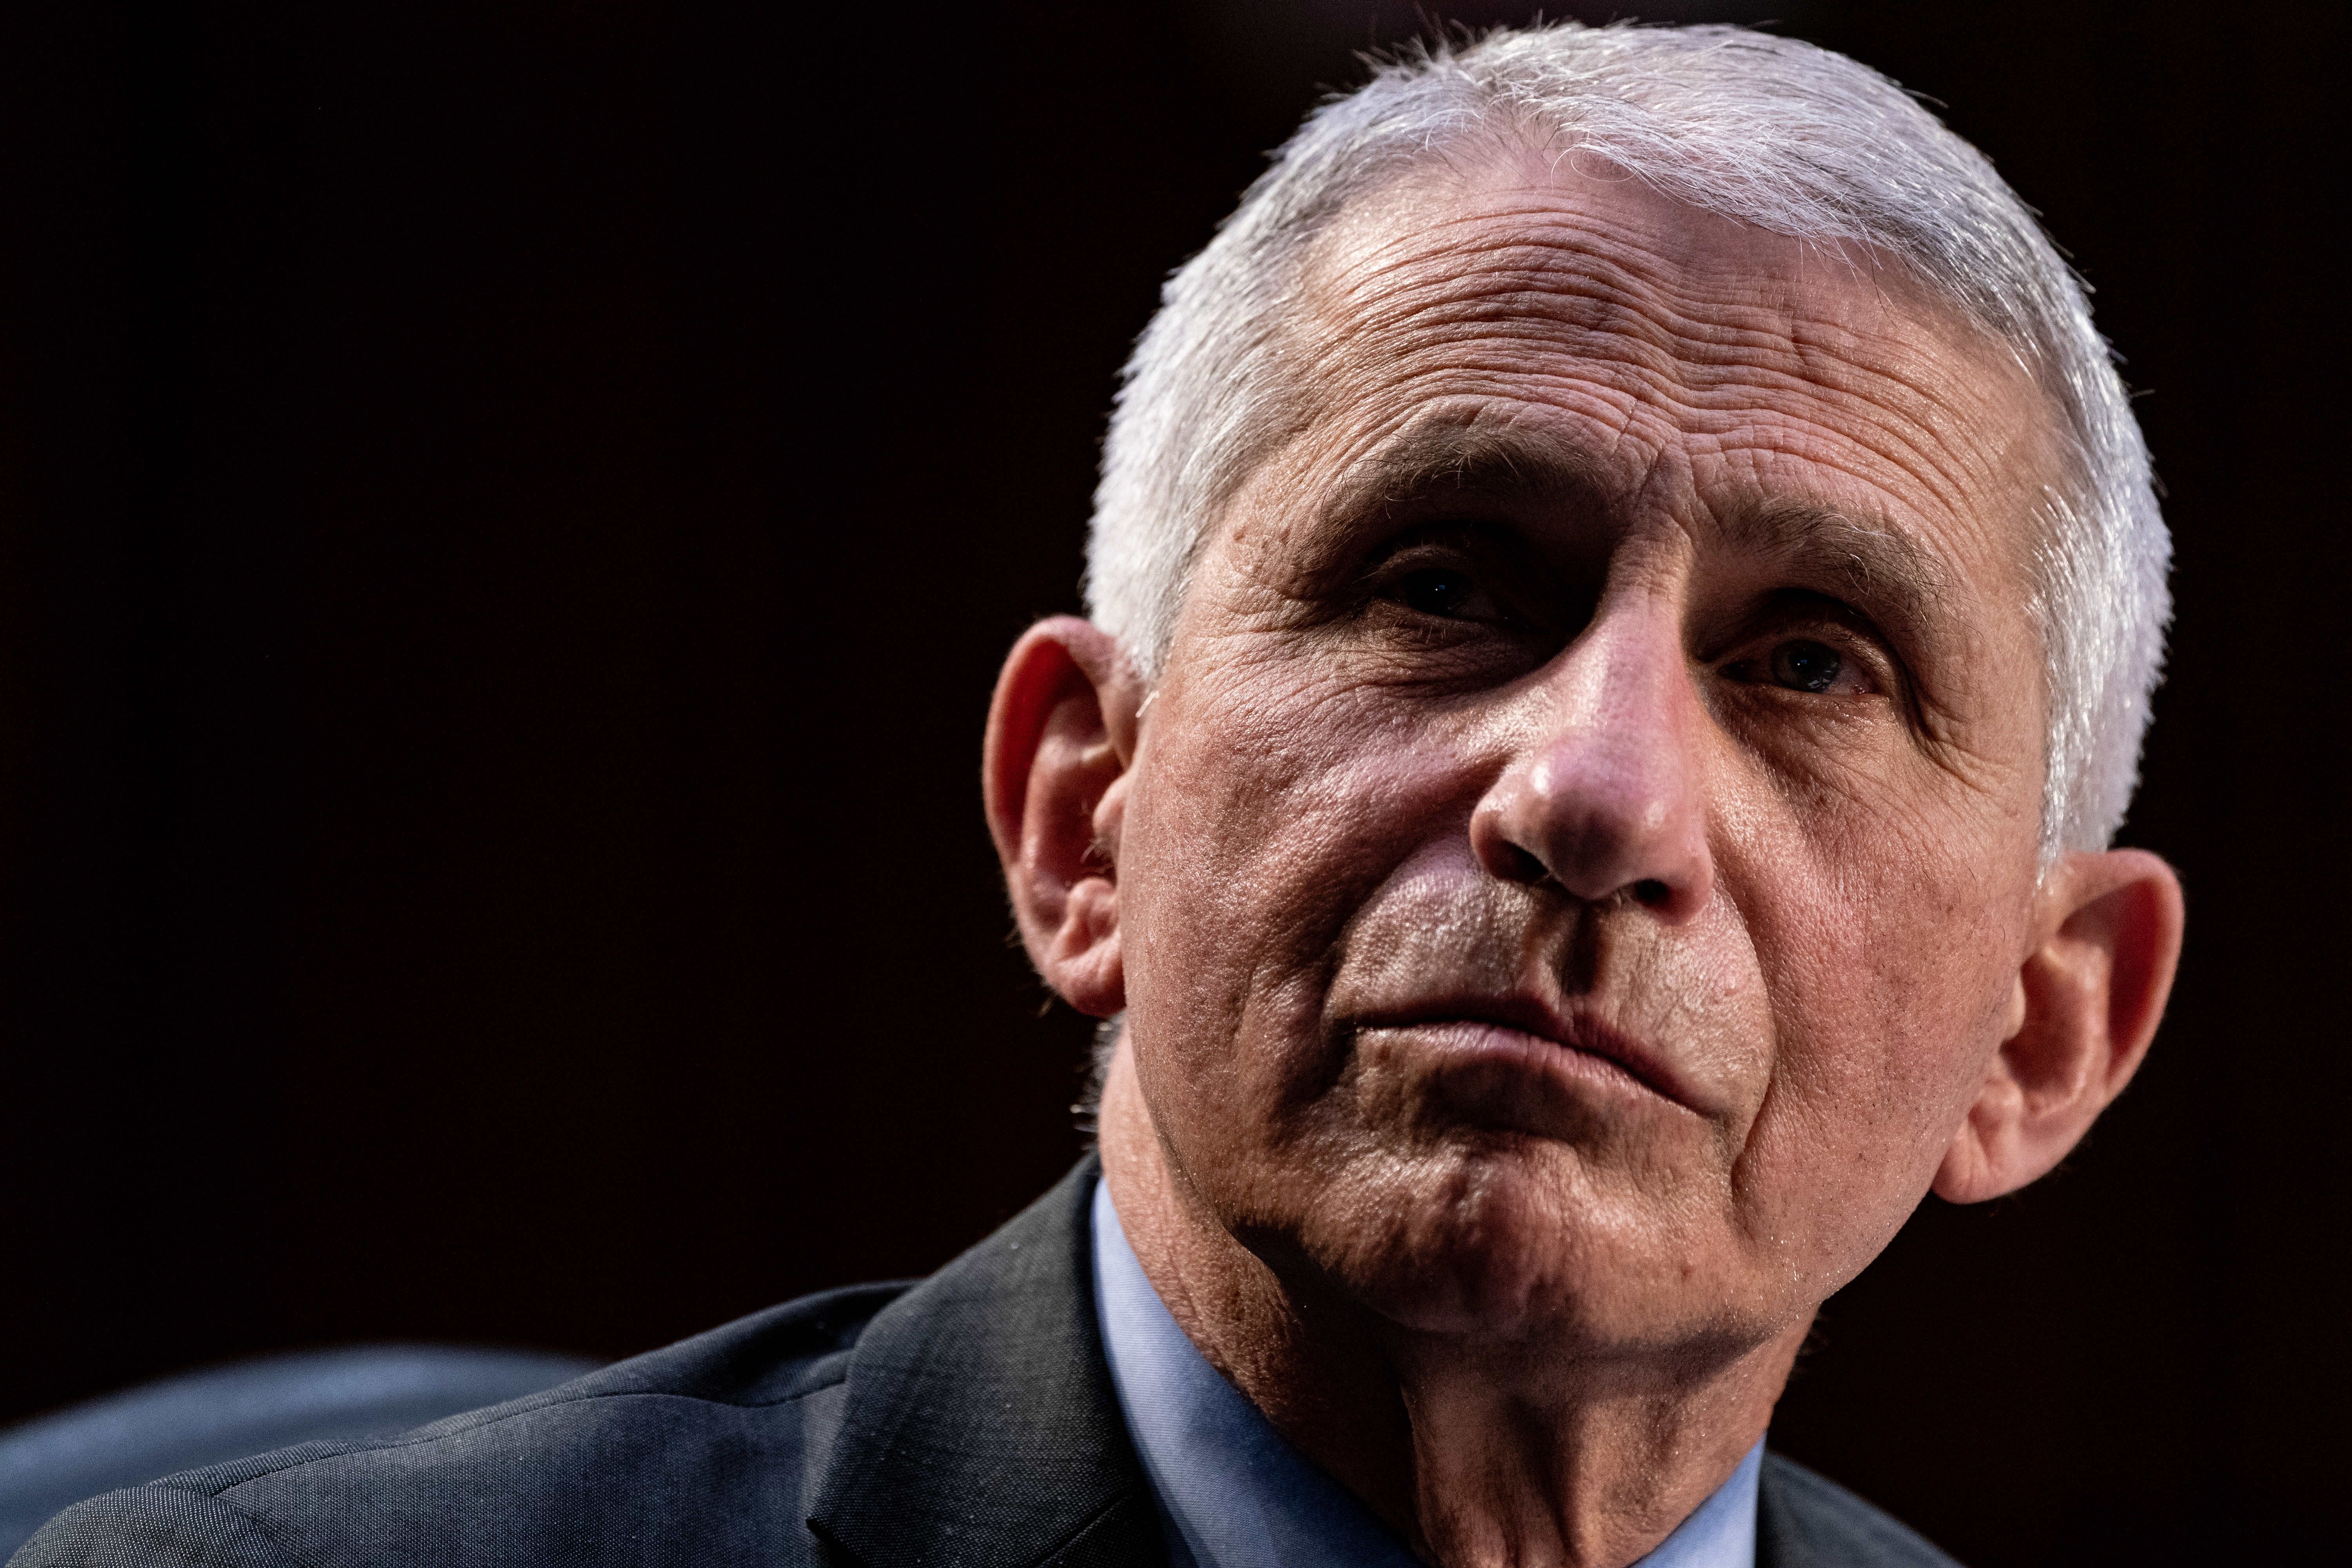 Anthony Fauci stares off camera.